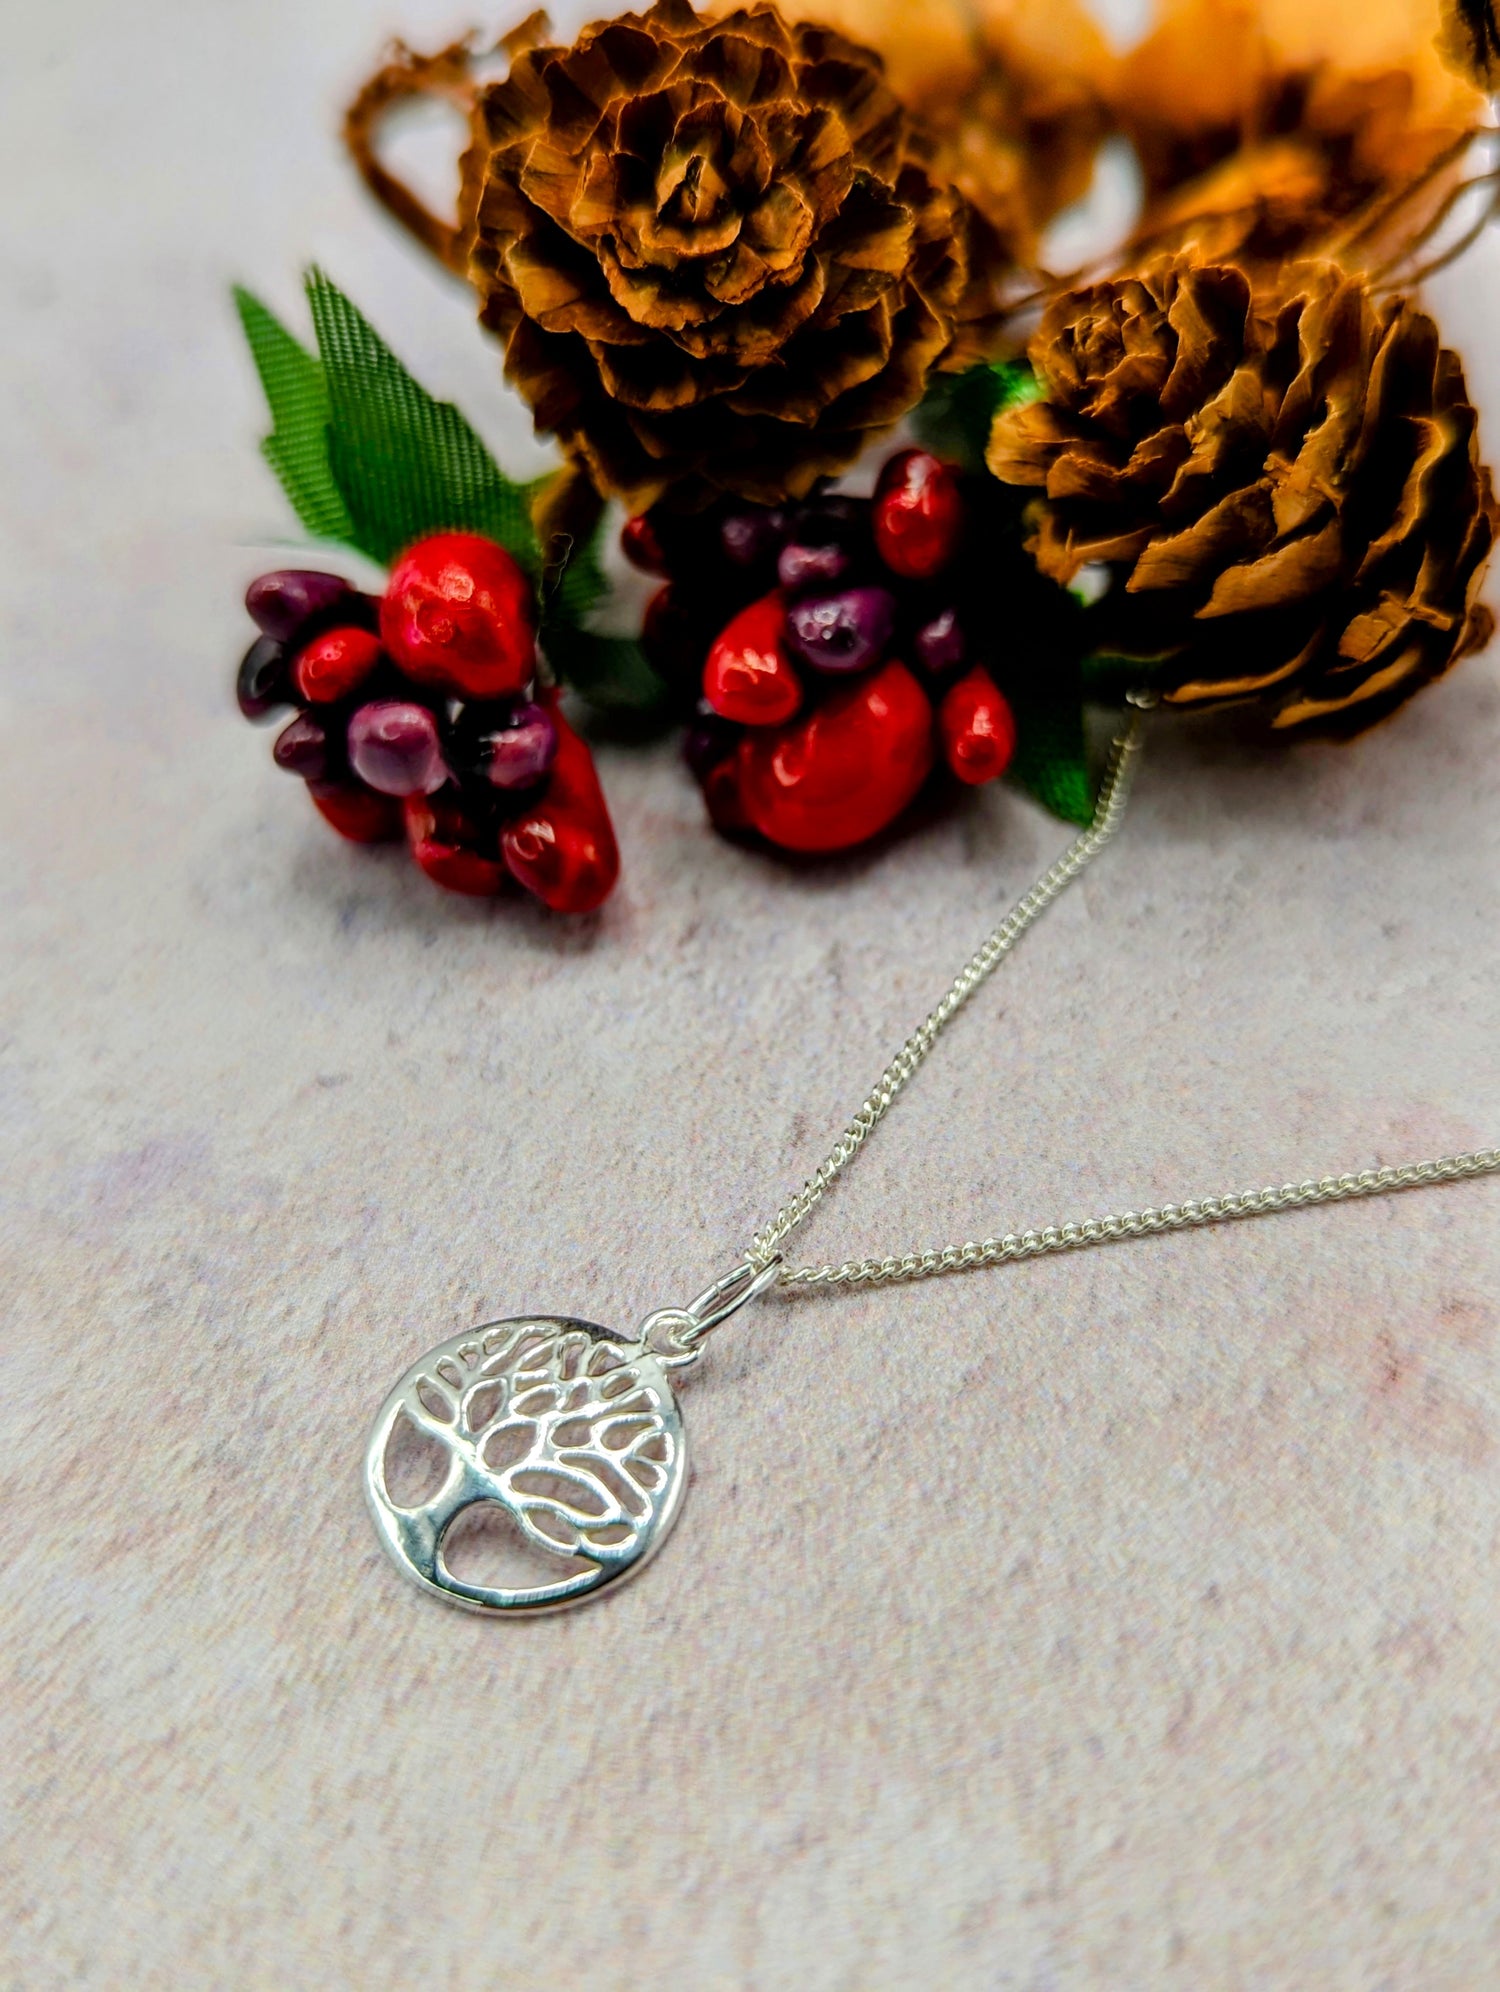 Tree of Life Sterling Silver Necklace - Silver Sunbird Bohemian